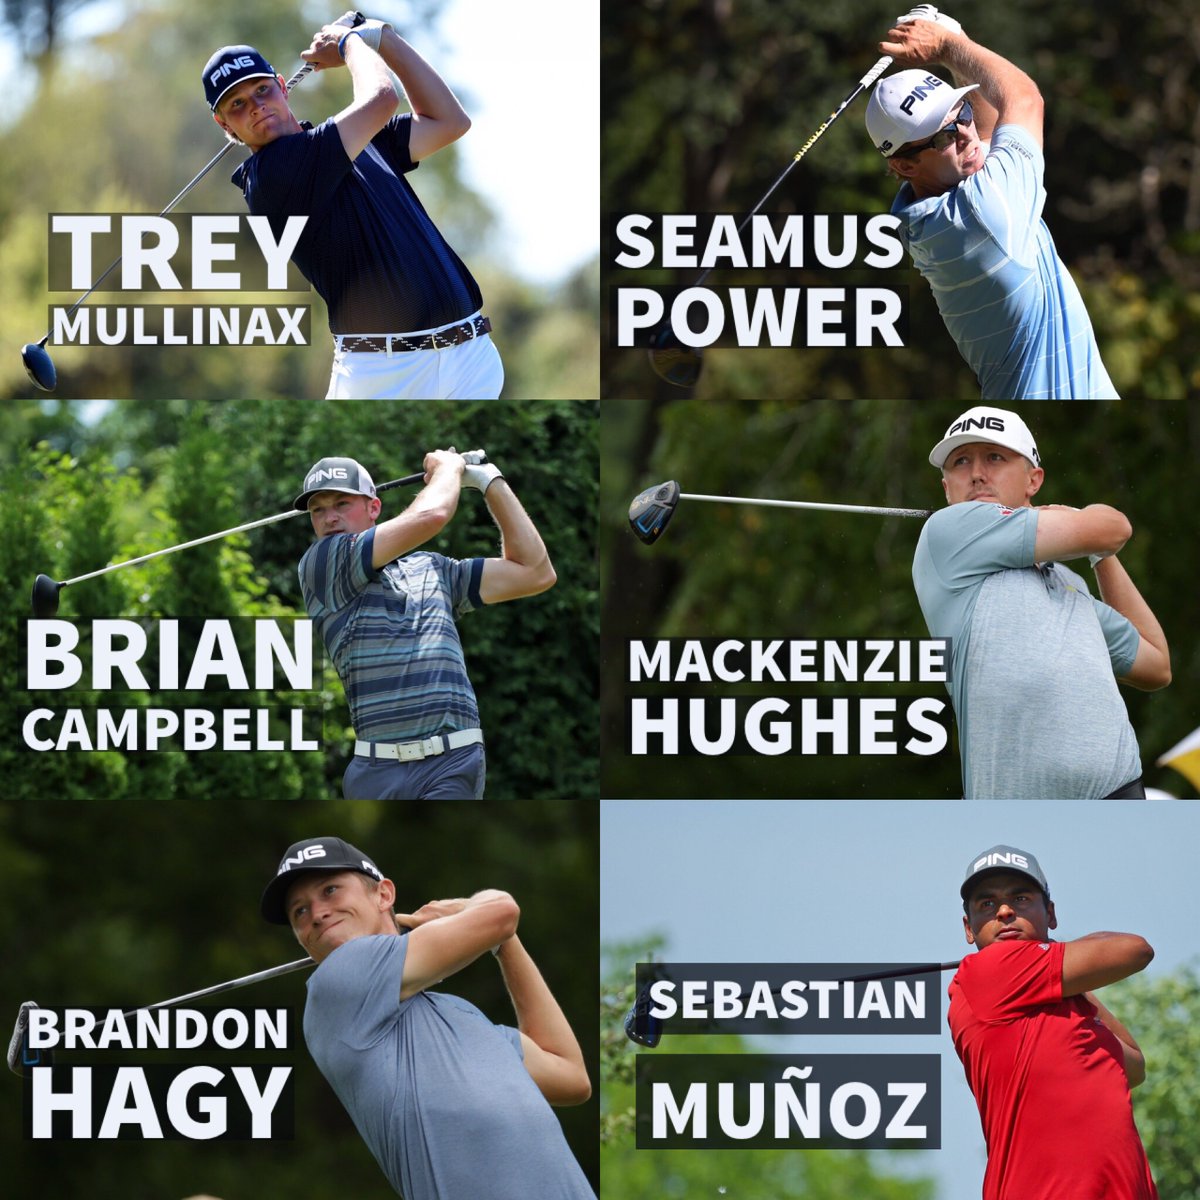 Congrats to the 6 PING Pros who earned PGA Tour cards yesterday! Nice playing pros, see you on tour next season!